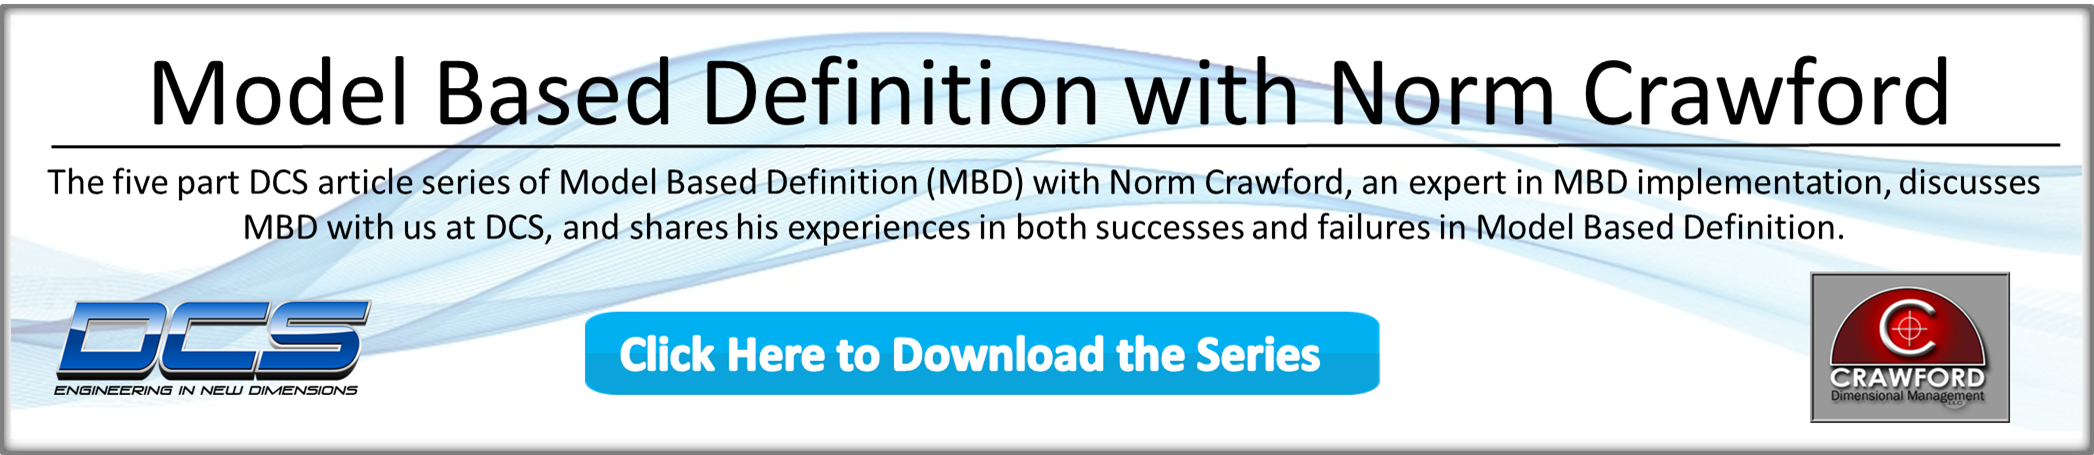 download-mbd-article-series-norm-crawford